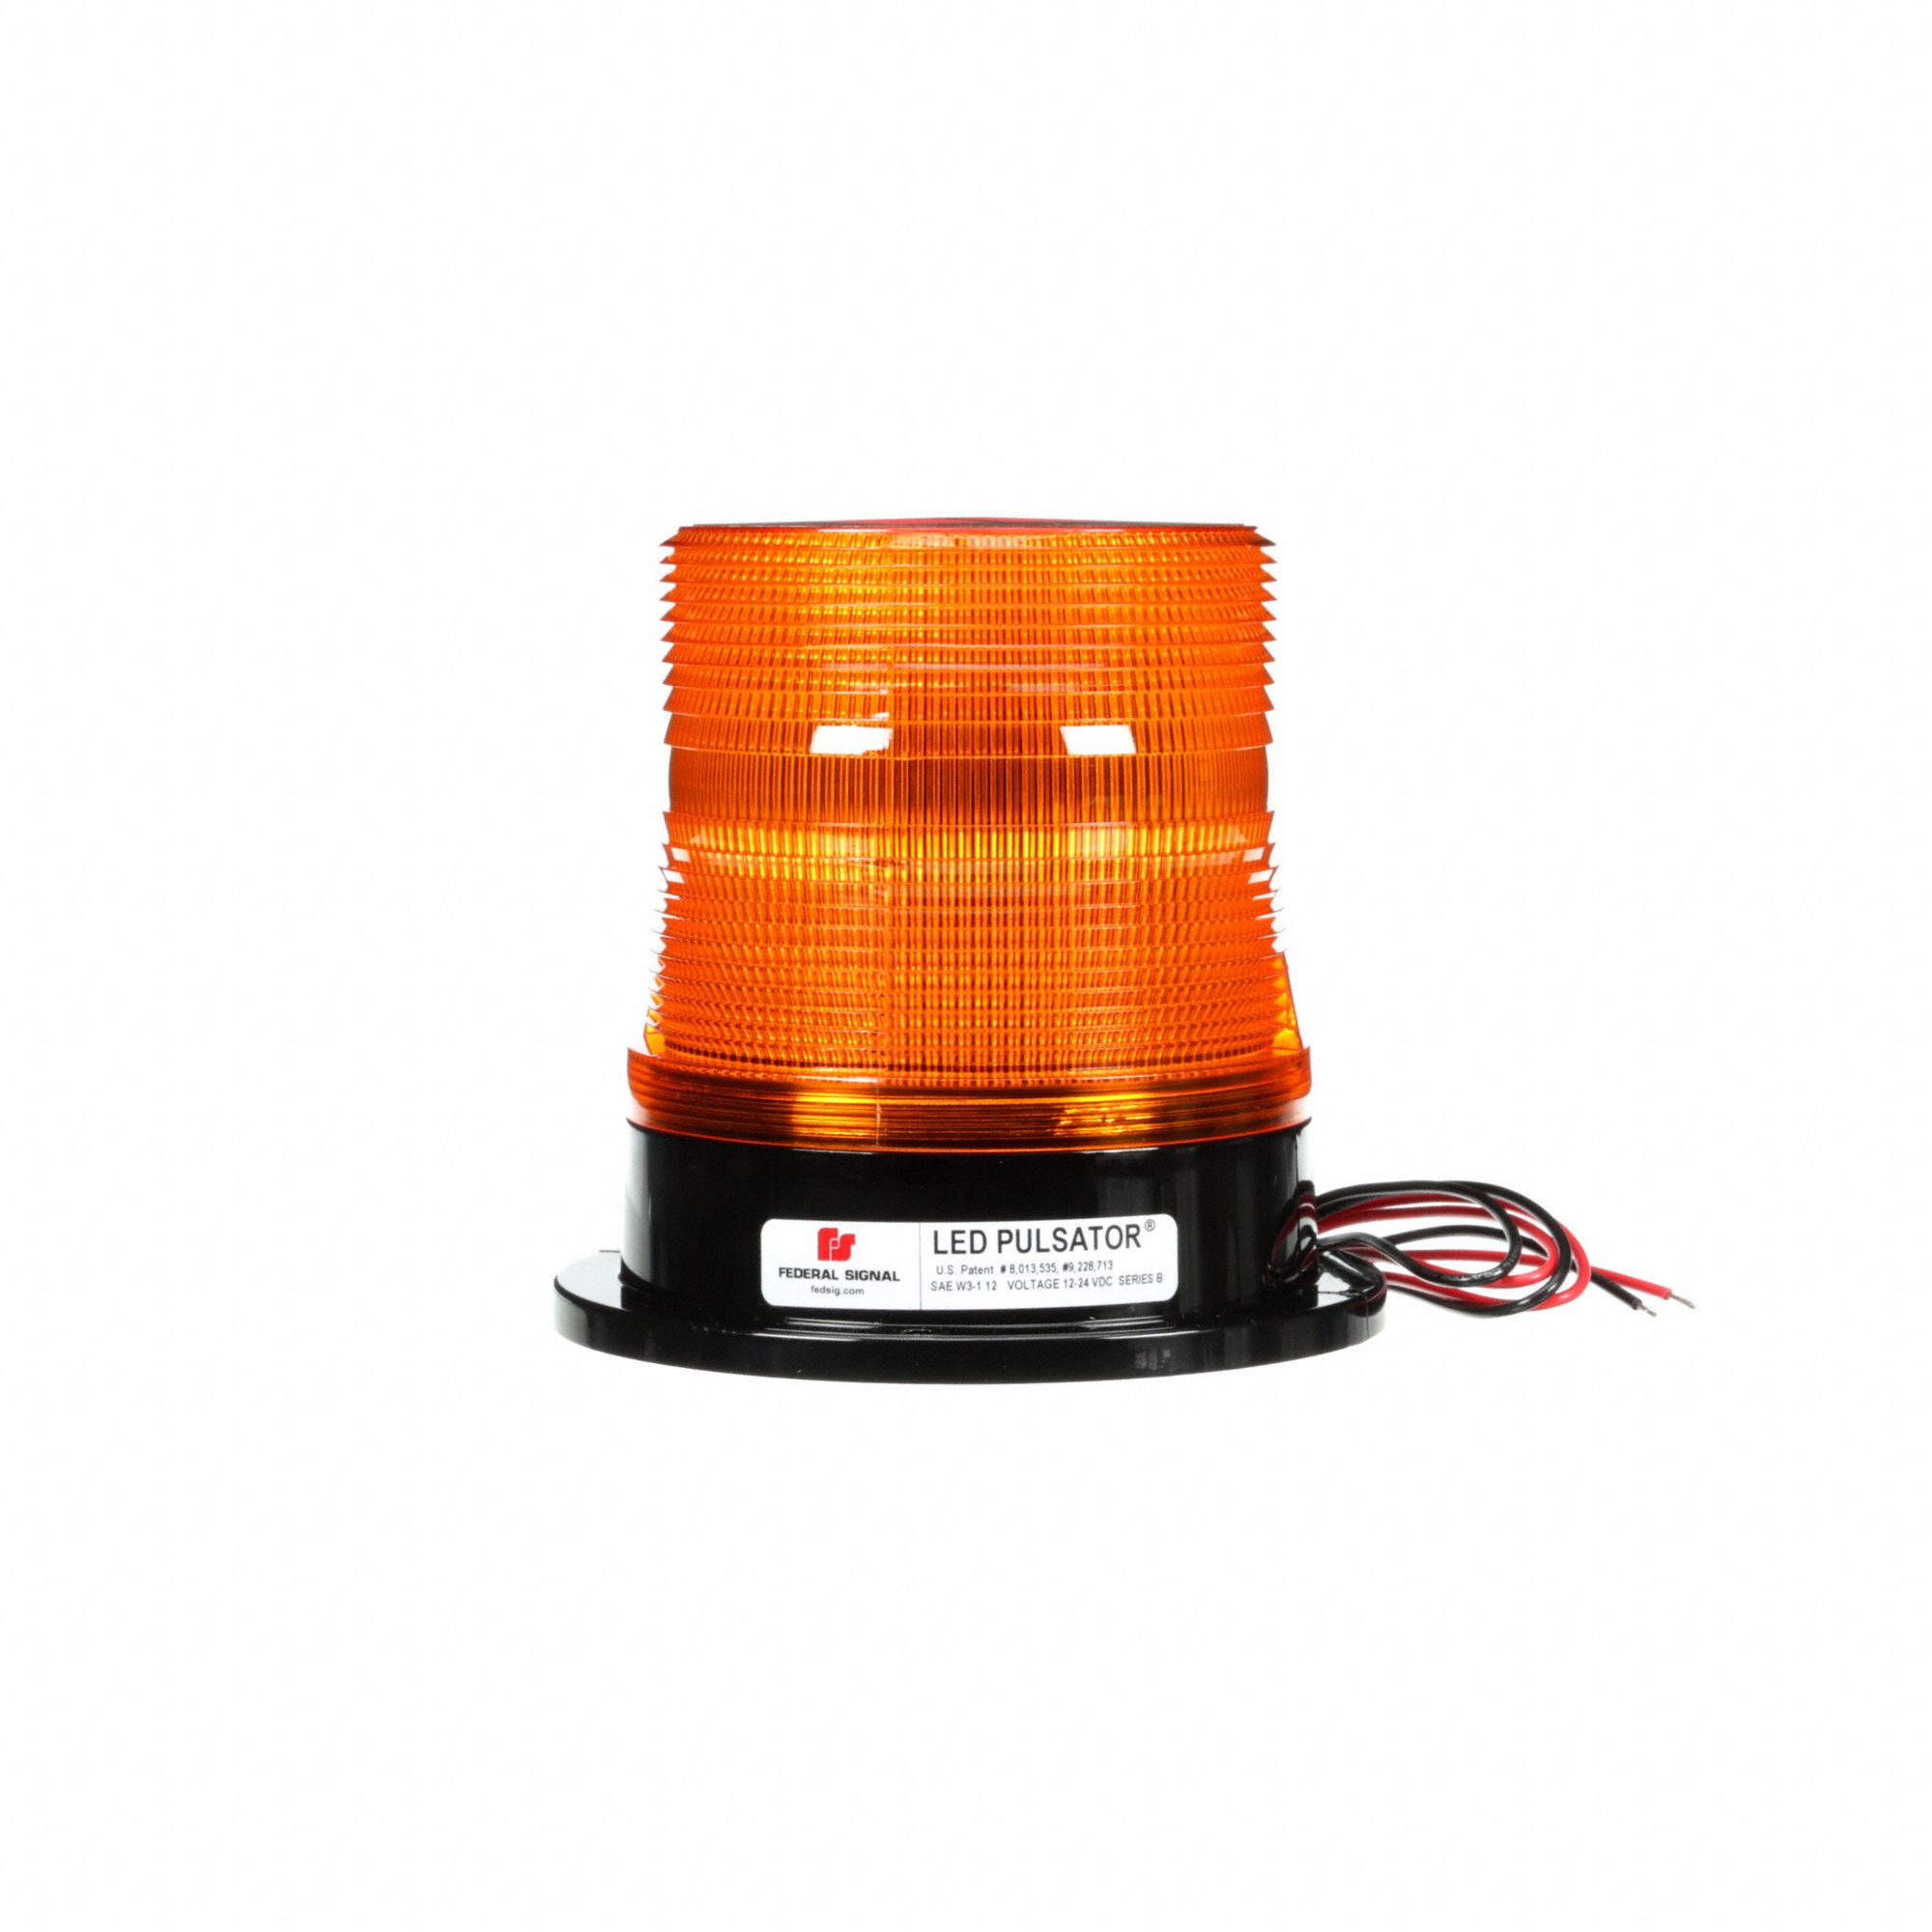 Federal Signal 212660-02SB Pulsator LED Beacon Class 1 Permanent Mount with Tall Amber Dome